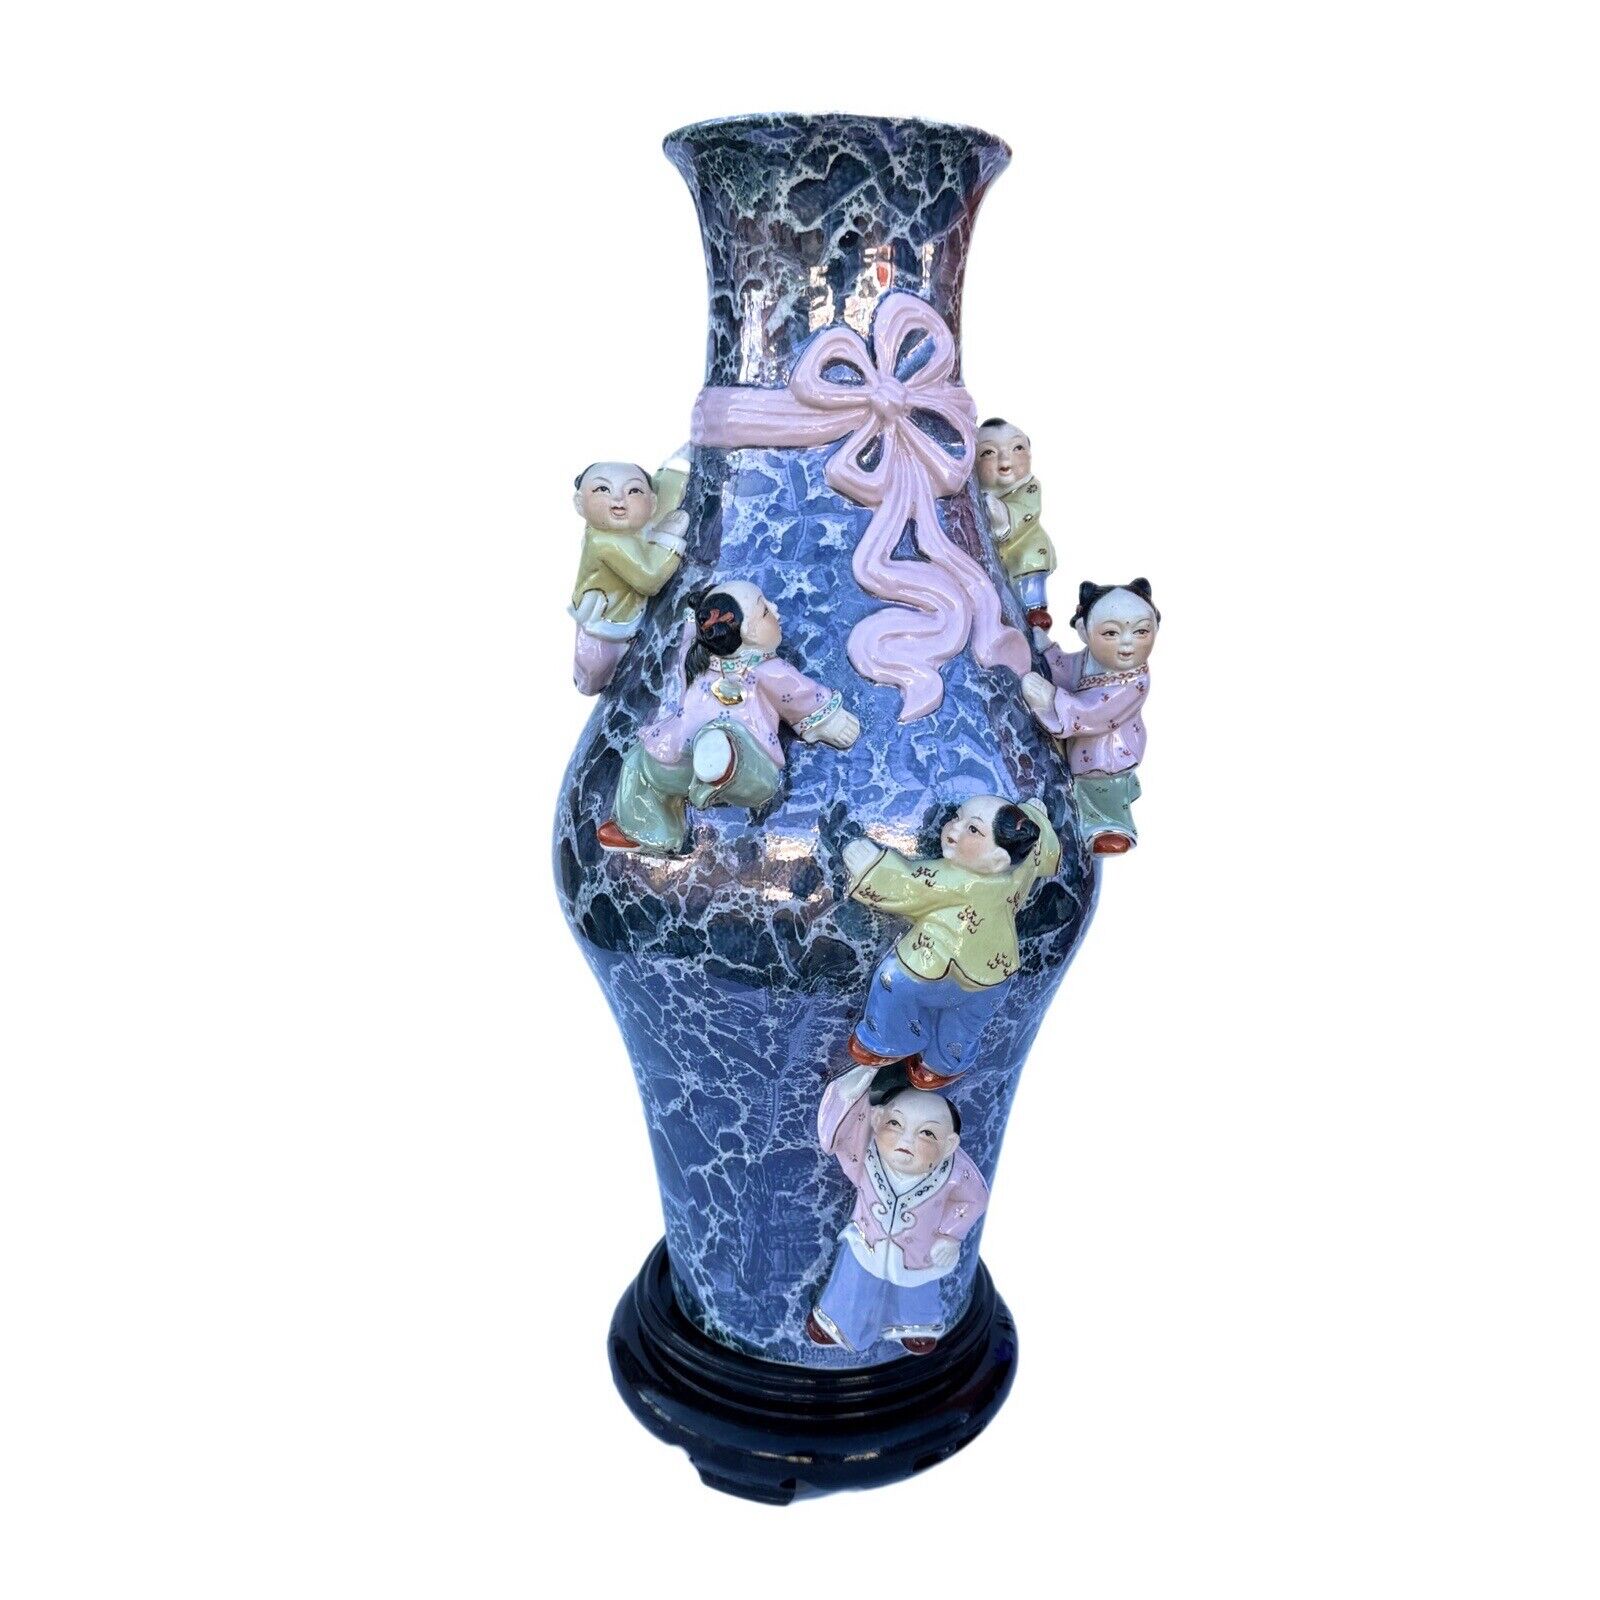 Chinese Traditional 7 Boys Fertility Vase, Ceramic hand painted 19”